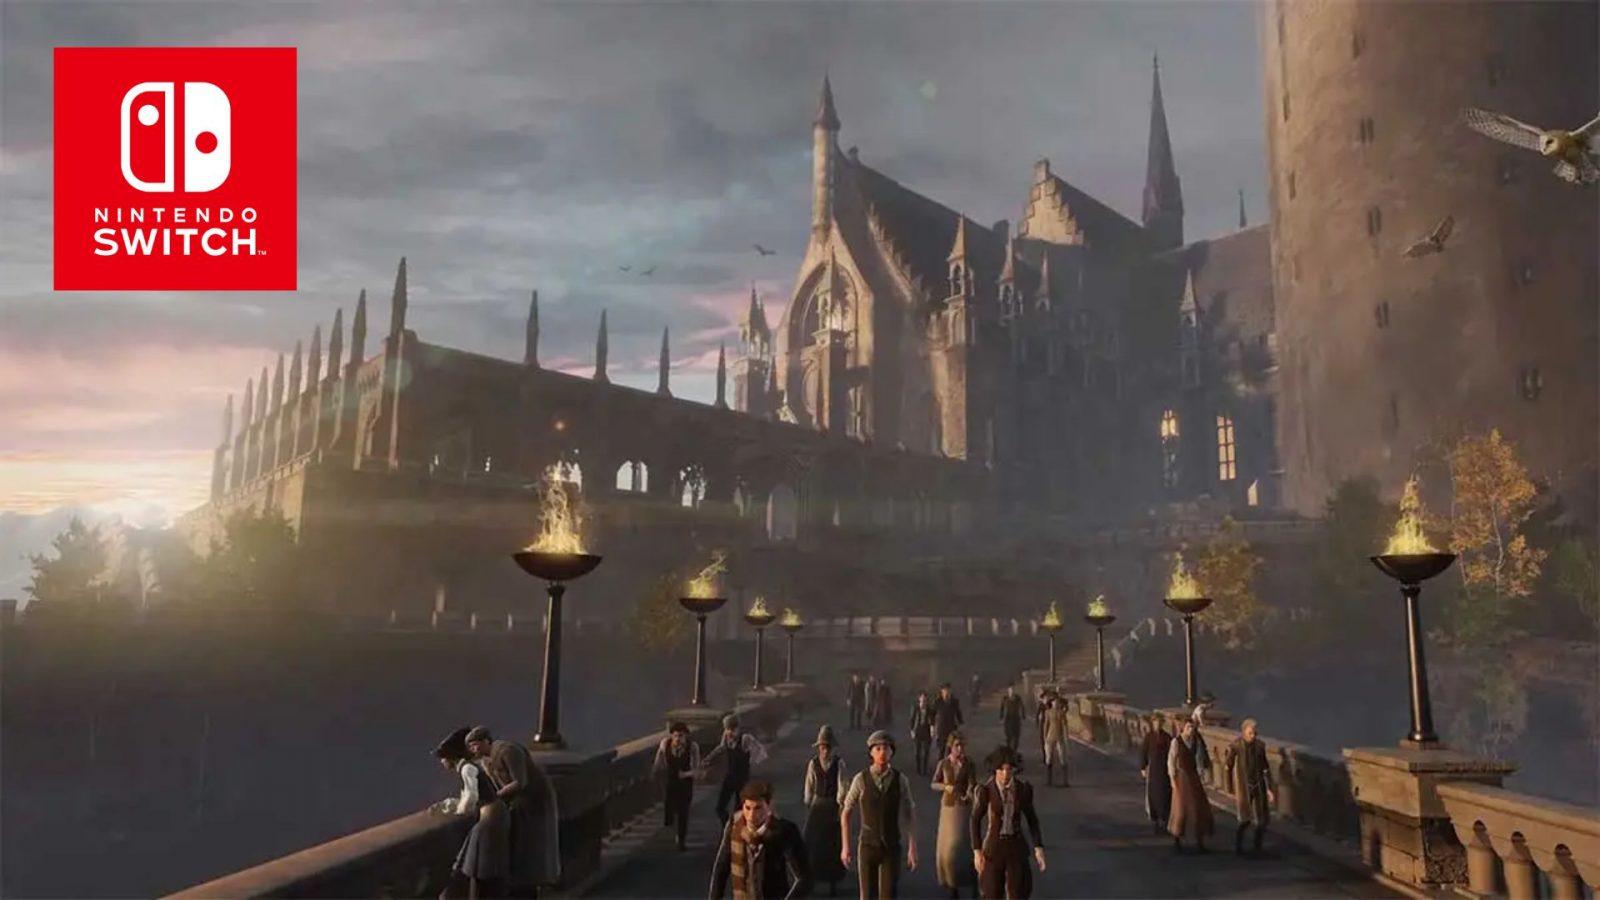 Hogwarts Legacy' delayed for Nintendo Switch, PS4 and Xbox One